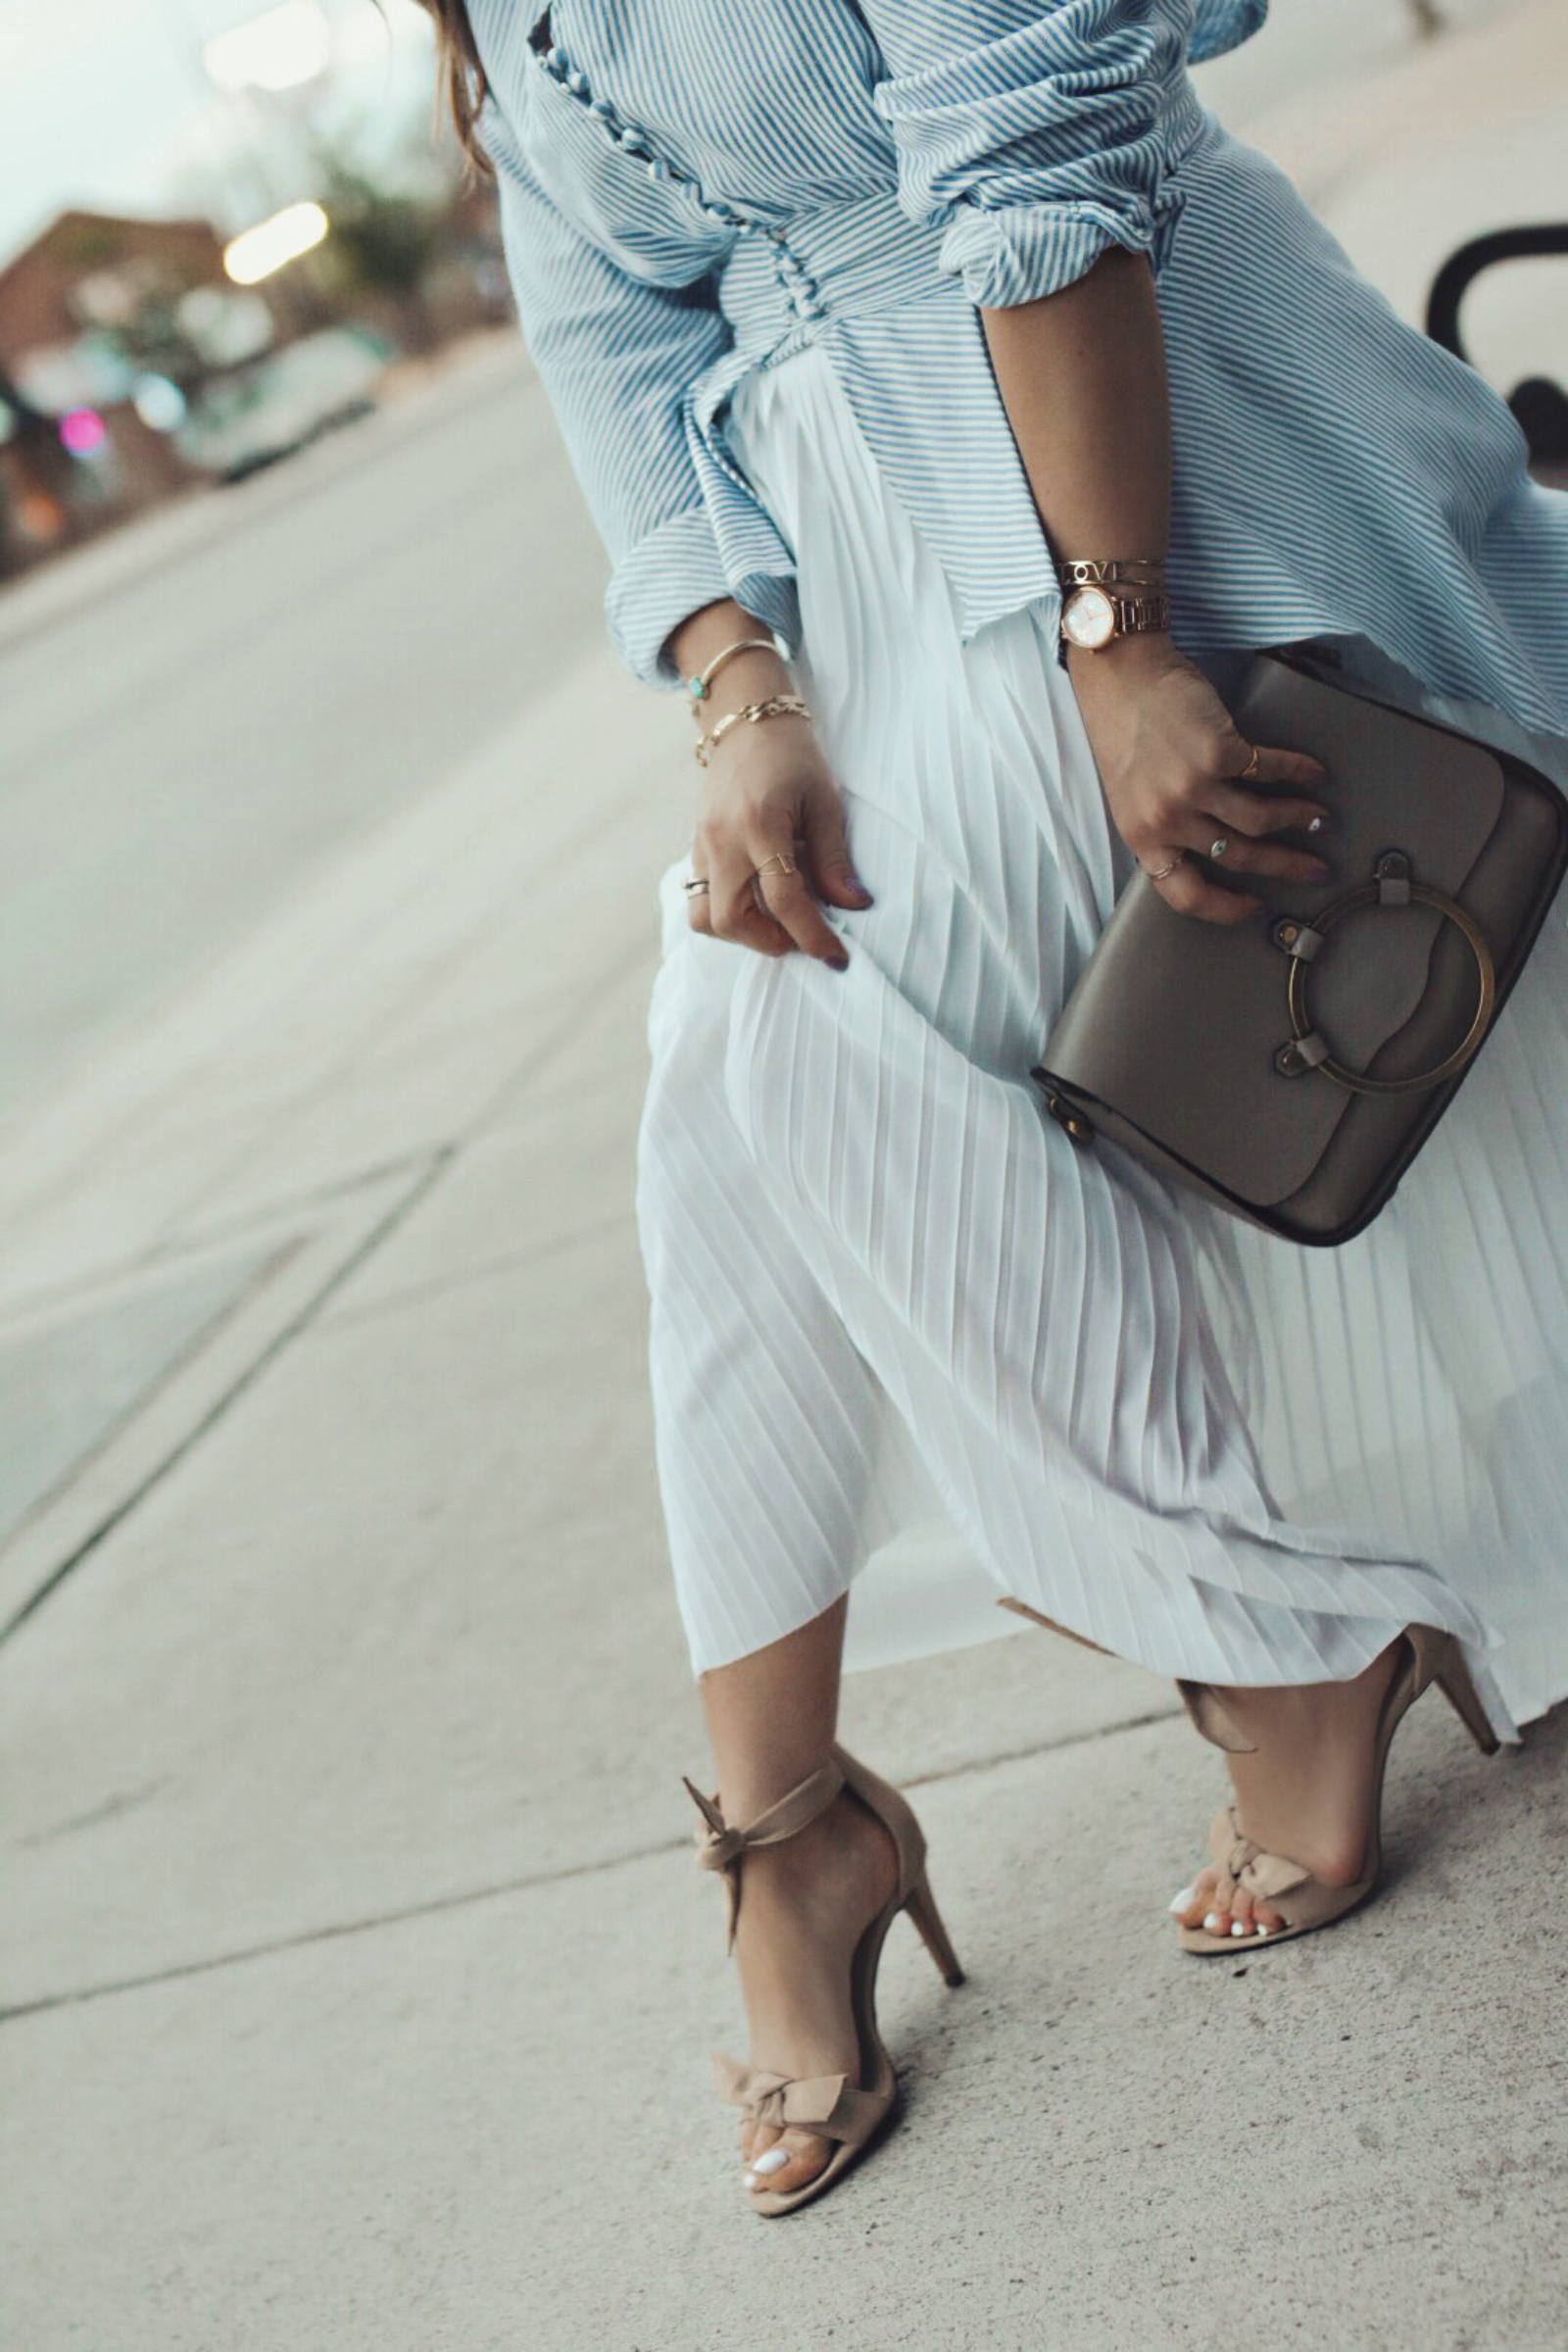 Carolina Hellal of Chic Talk wearing a Chicwish striped long top, a white midi skirt, and Vince Camuto sandals.